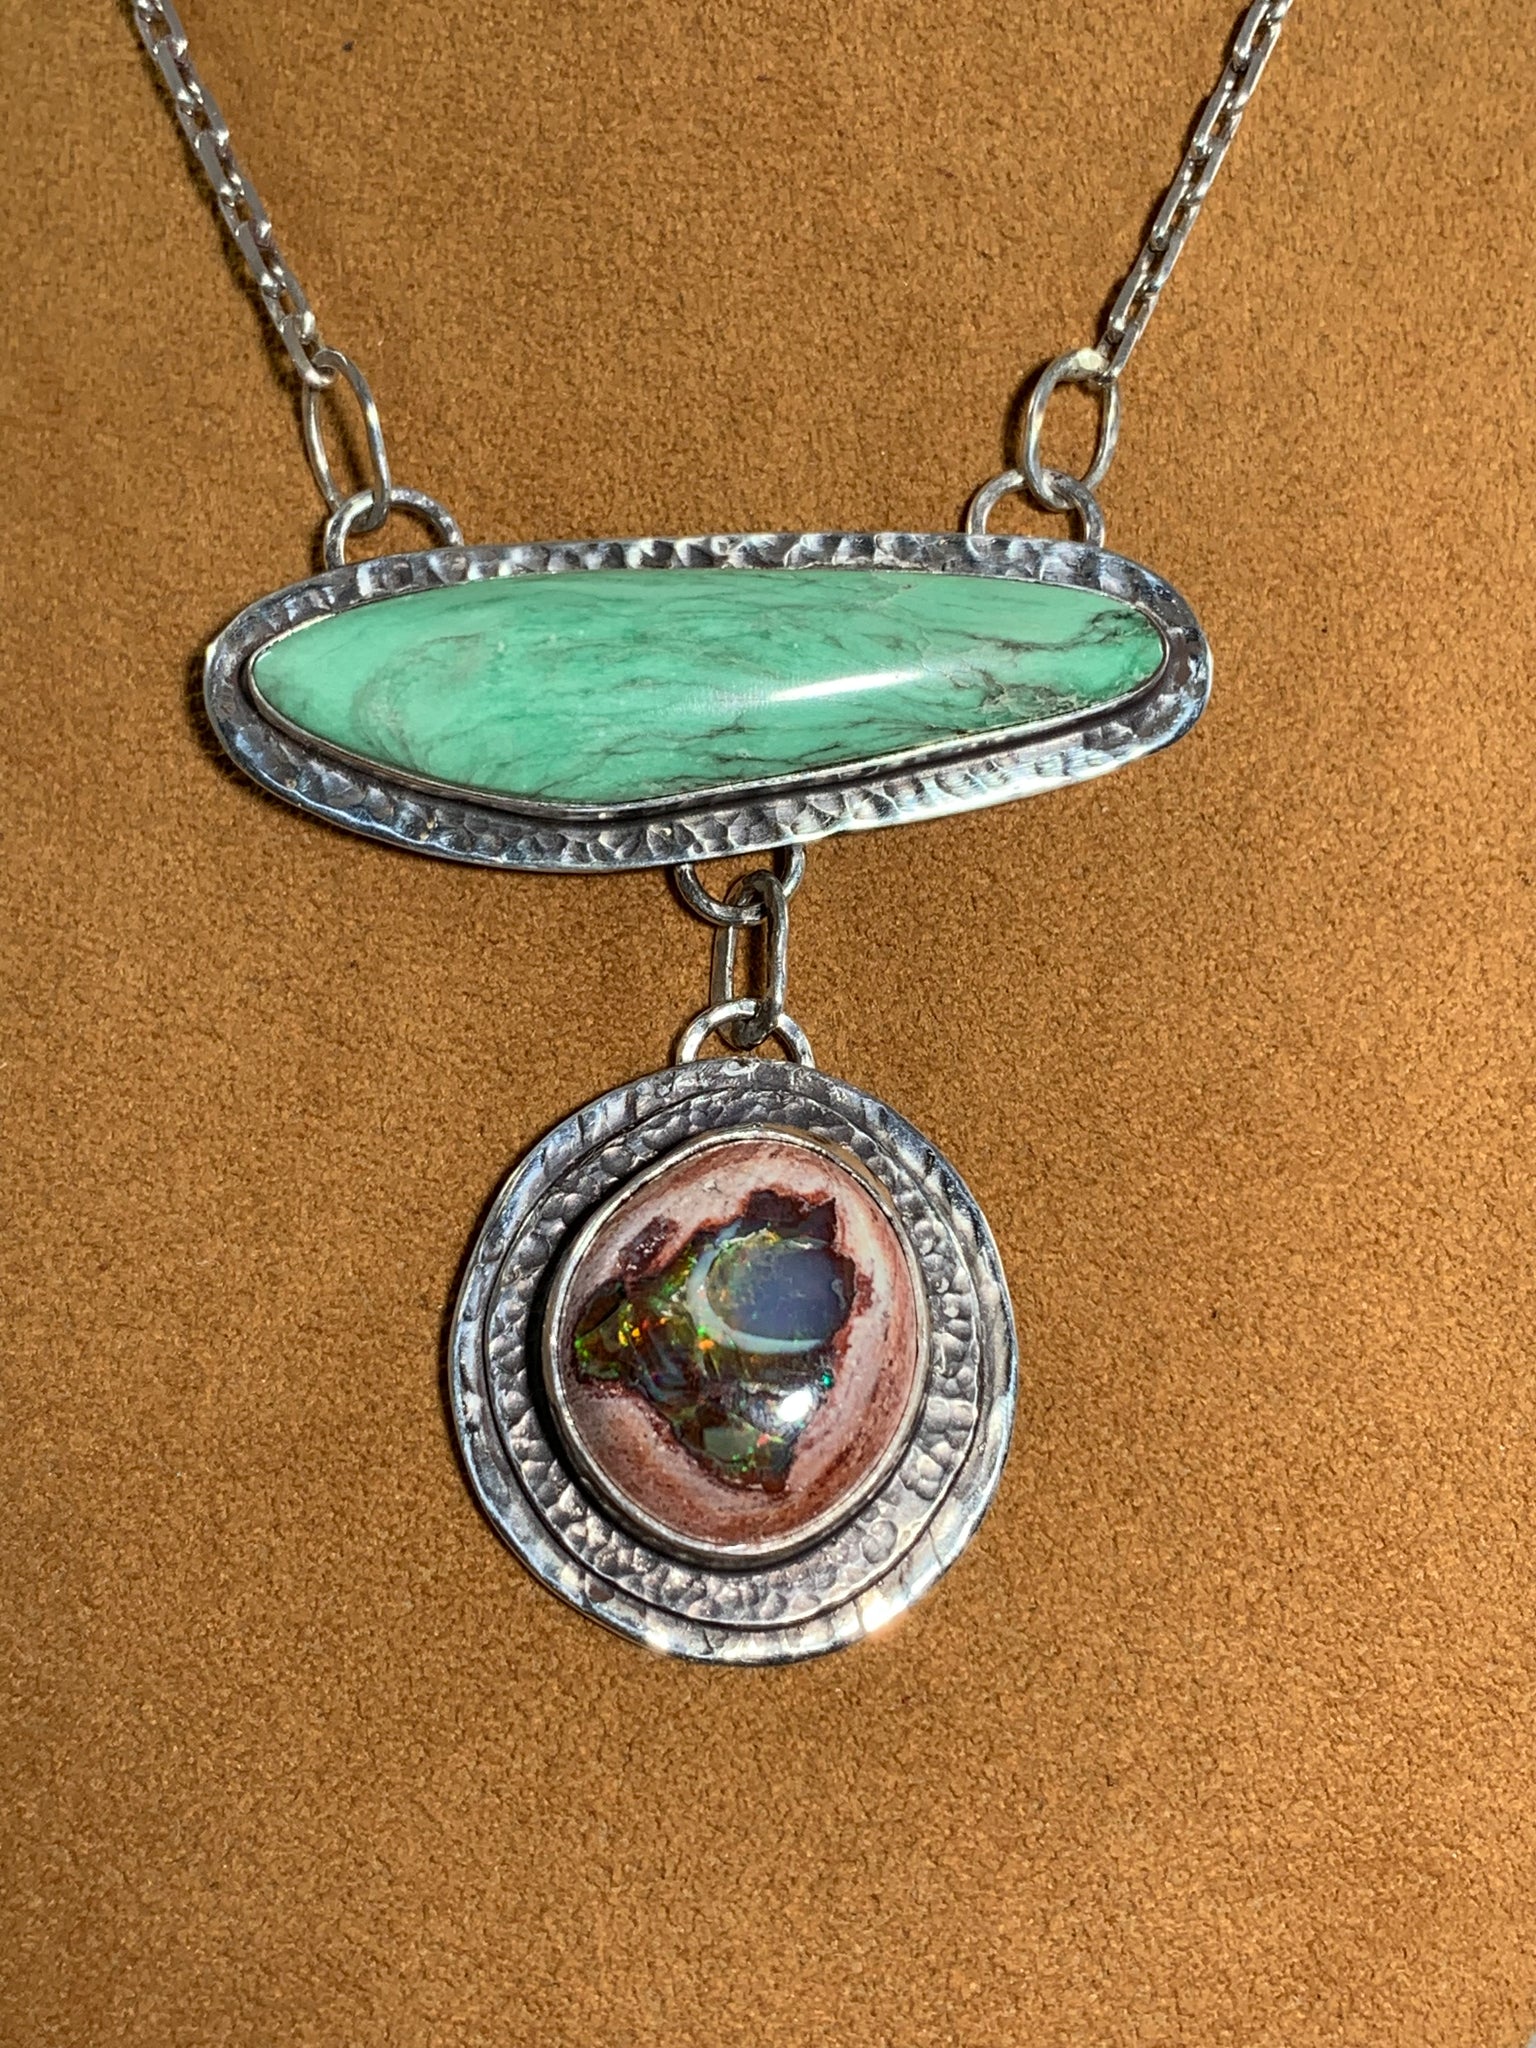 Mexican Opal and Turquoise Necklace by Dezbah Stumpff